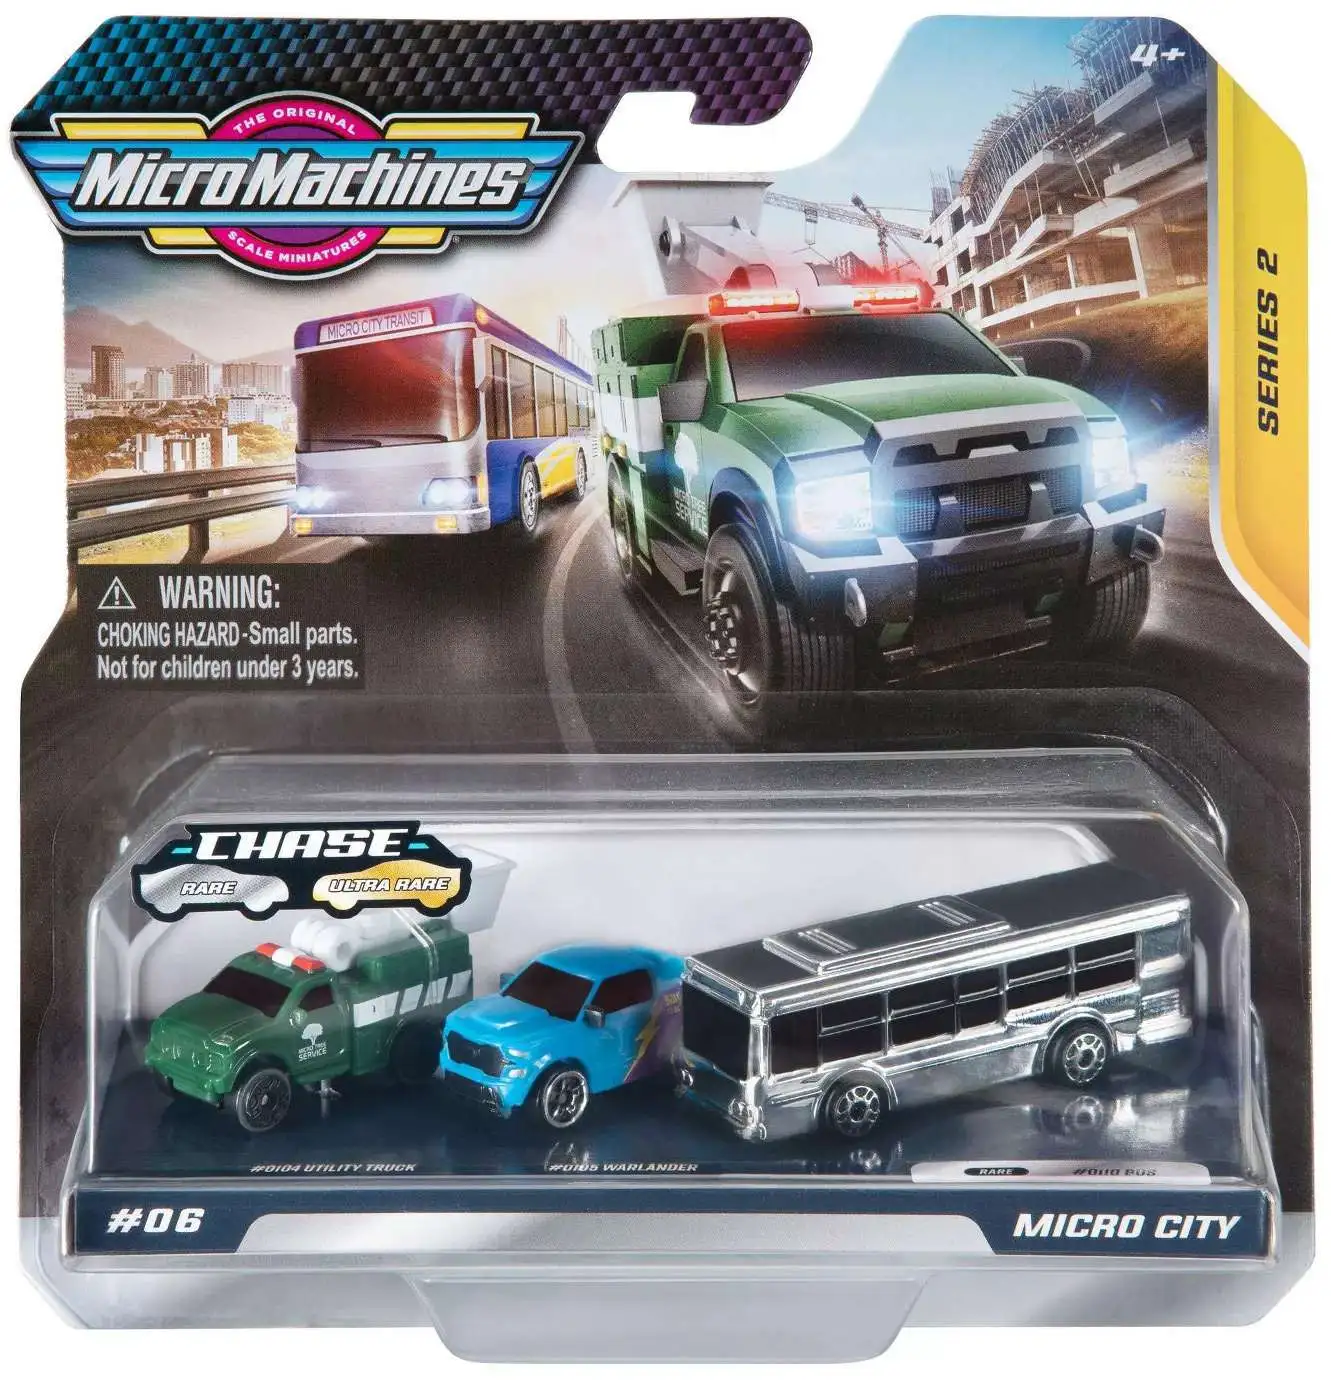 Toy car Collection Chance of Rare Race Cars Ultimate Exotics Micro Machines Starter Pack Includes 3 Vehicles 